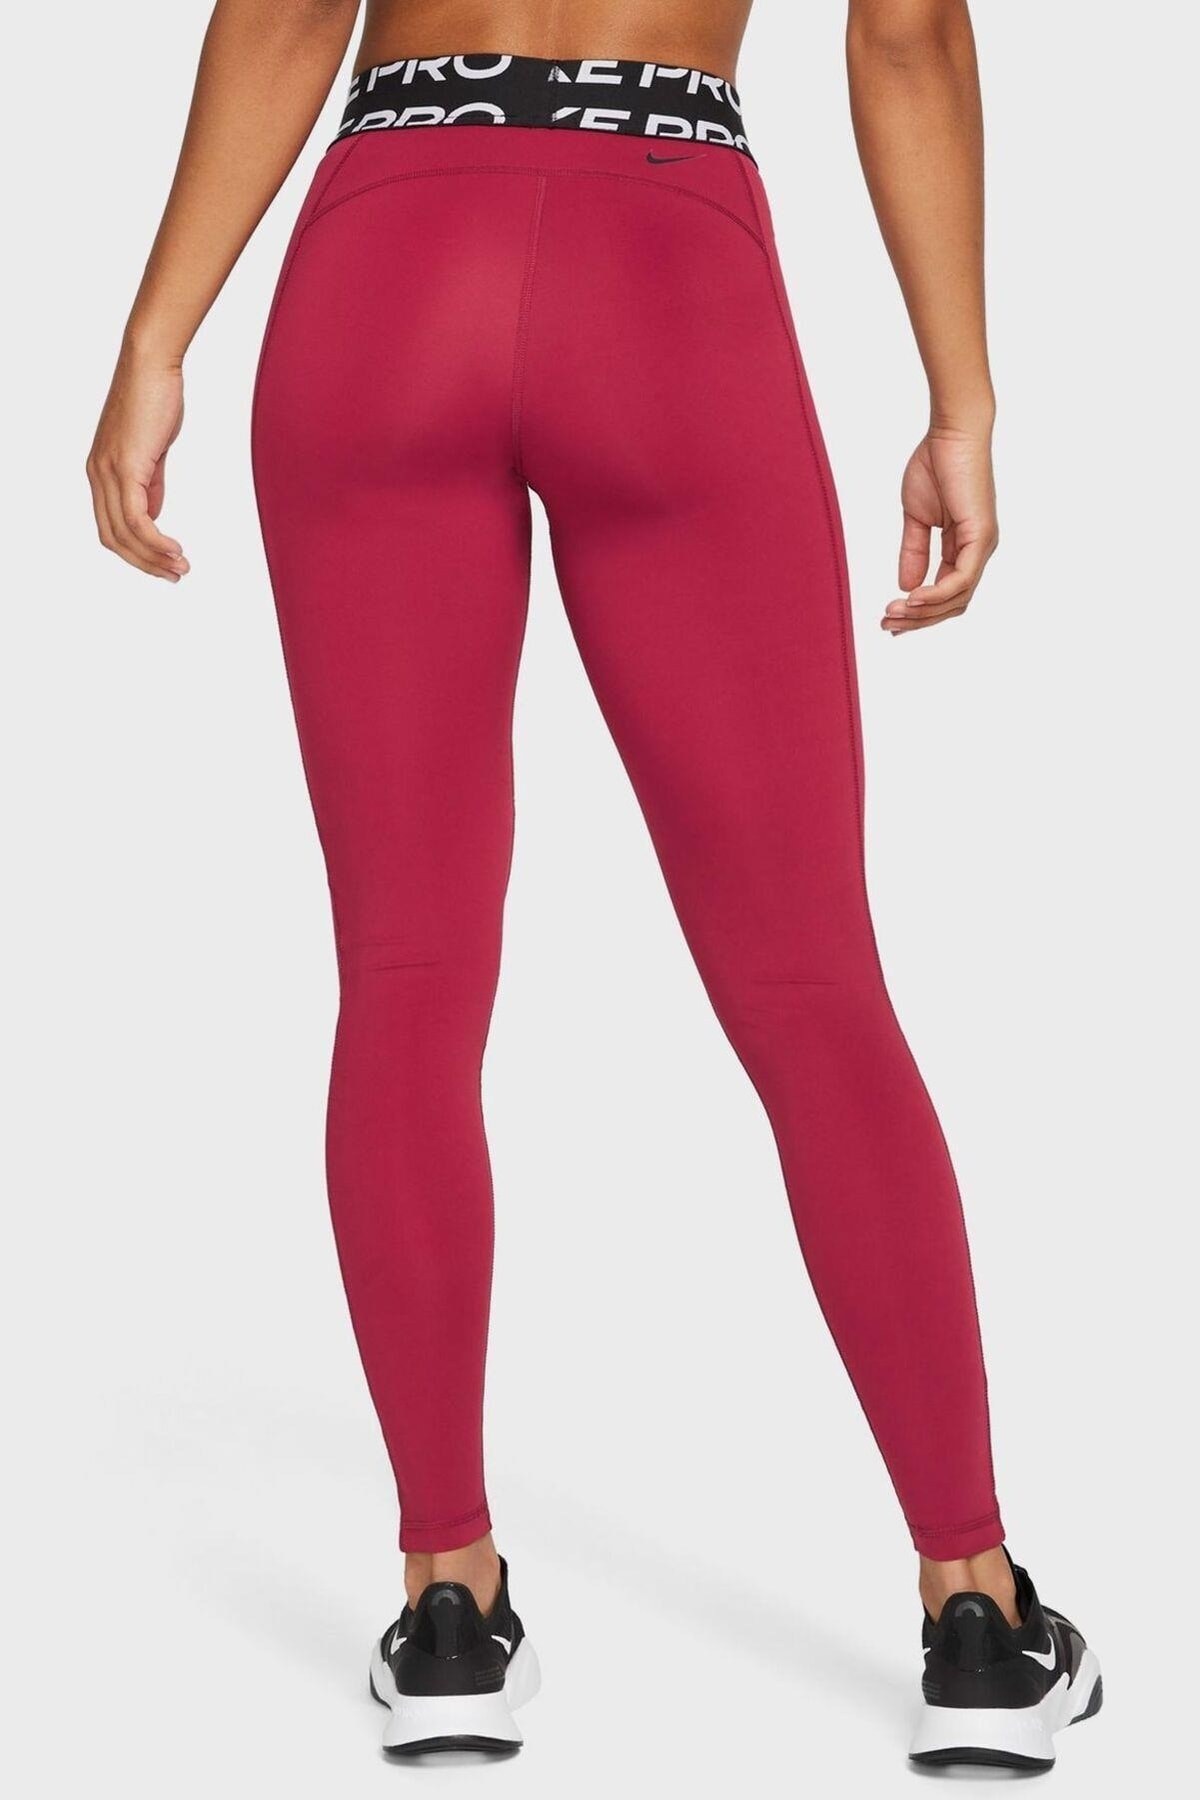 Buy Nike Black AS W NP TGHT CROSSOVER Tights - Tights for Women 7182446 |  Myntra